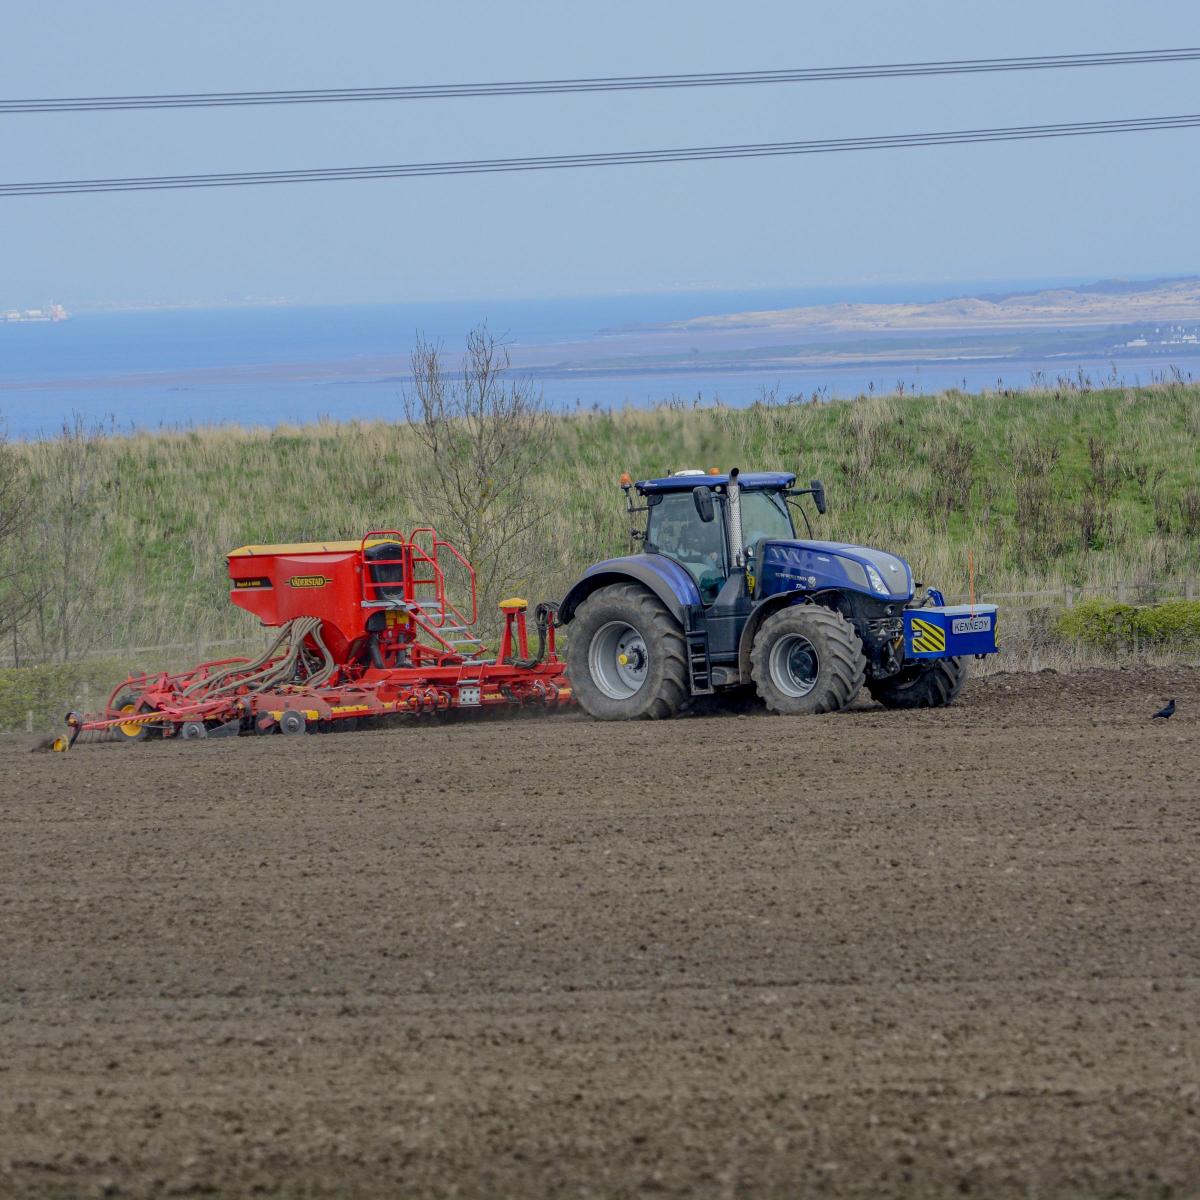 Ross Lyall - Looking over the forth with a beautiful T7.315 and 6 metre Vaderstad drill